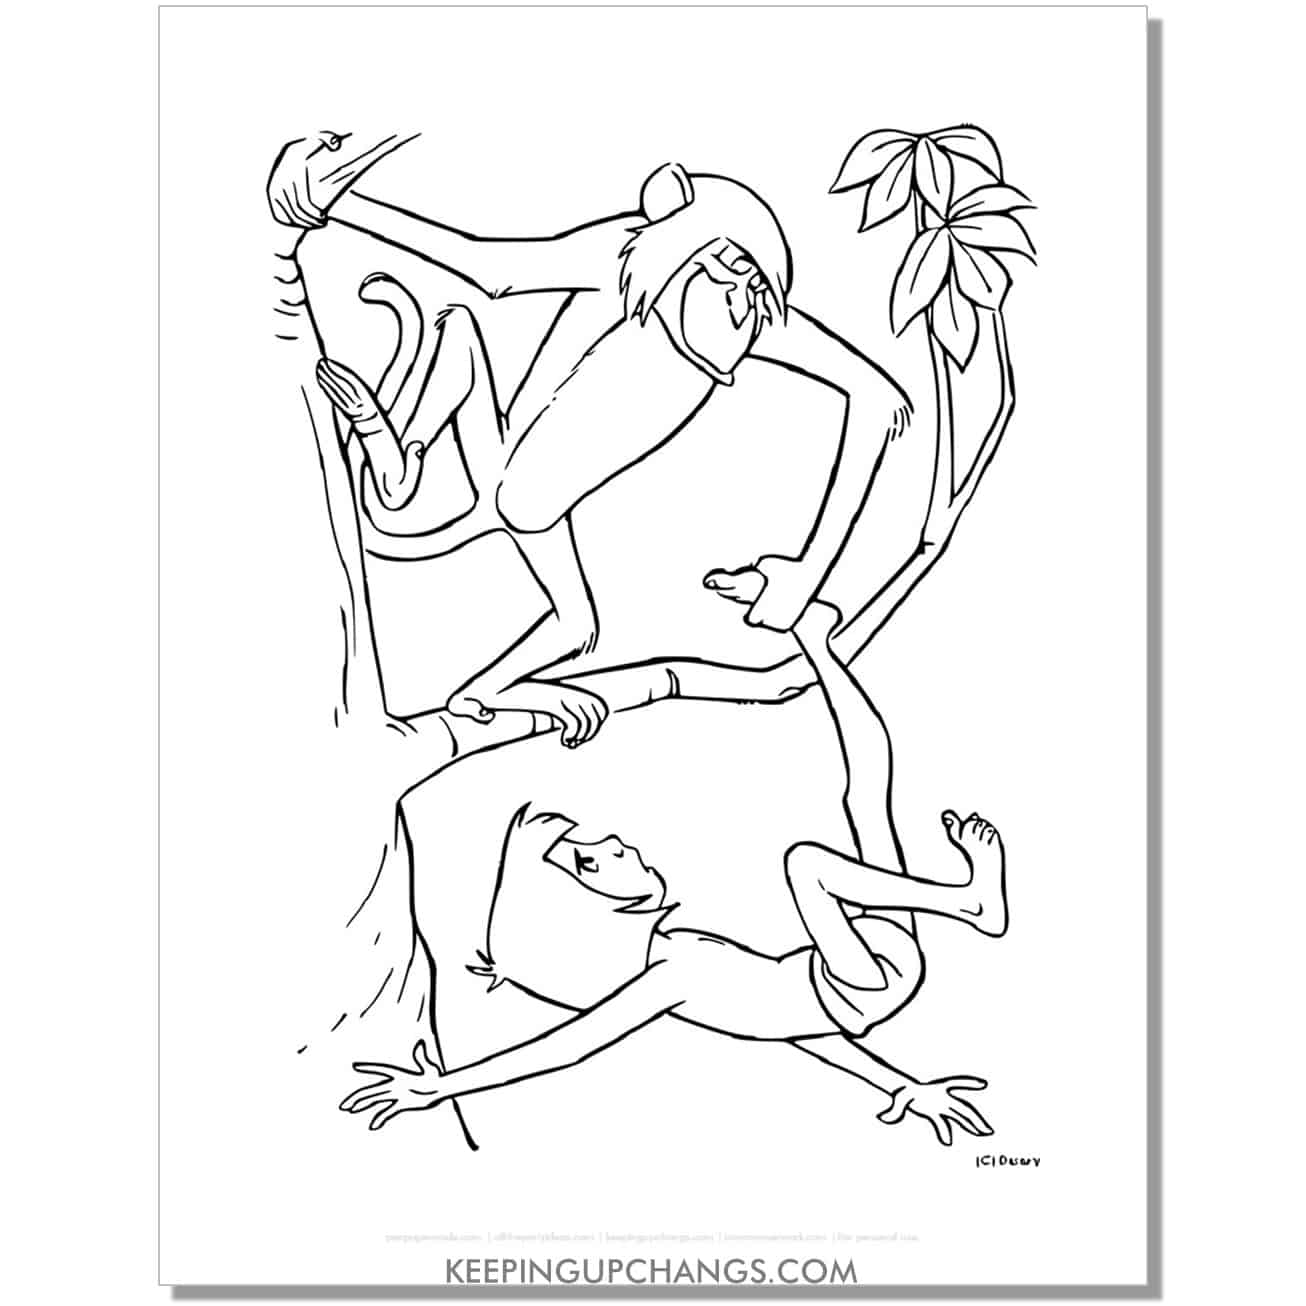 monkey holding mowgli by the foot jungle book coloring page, sheet.